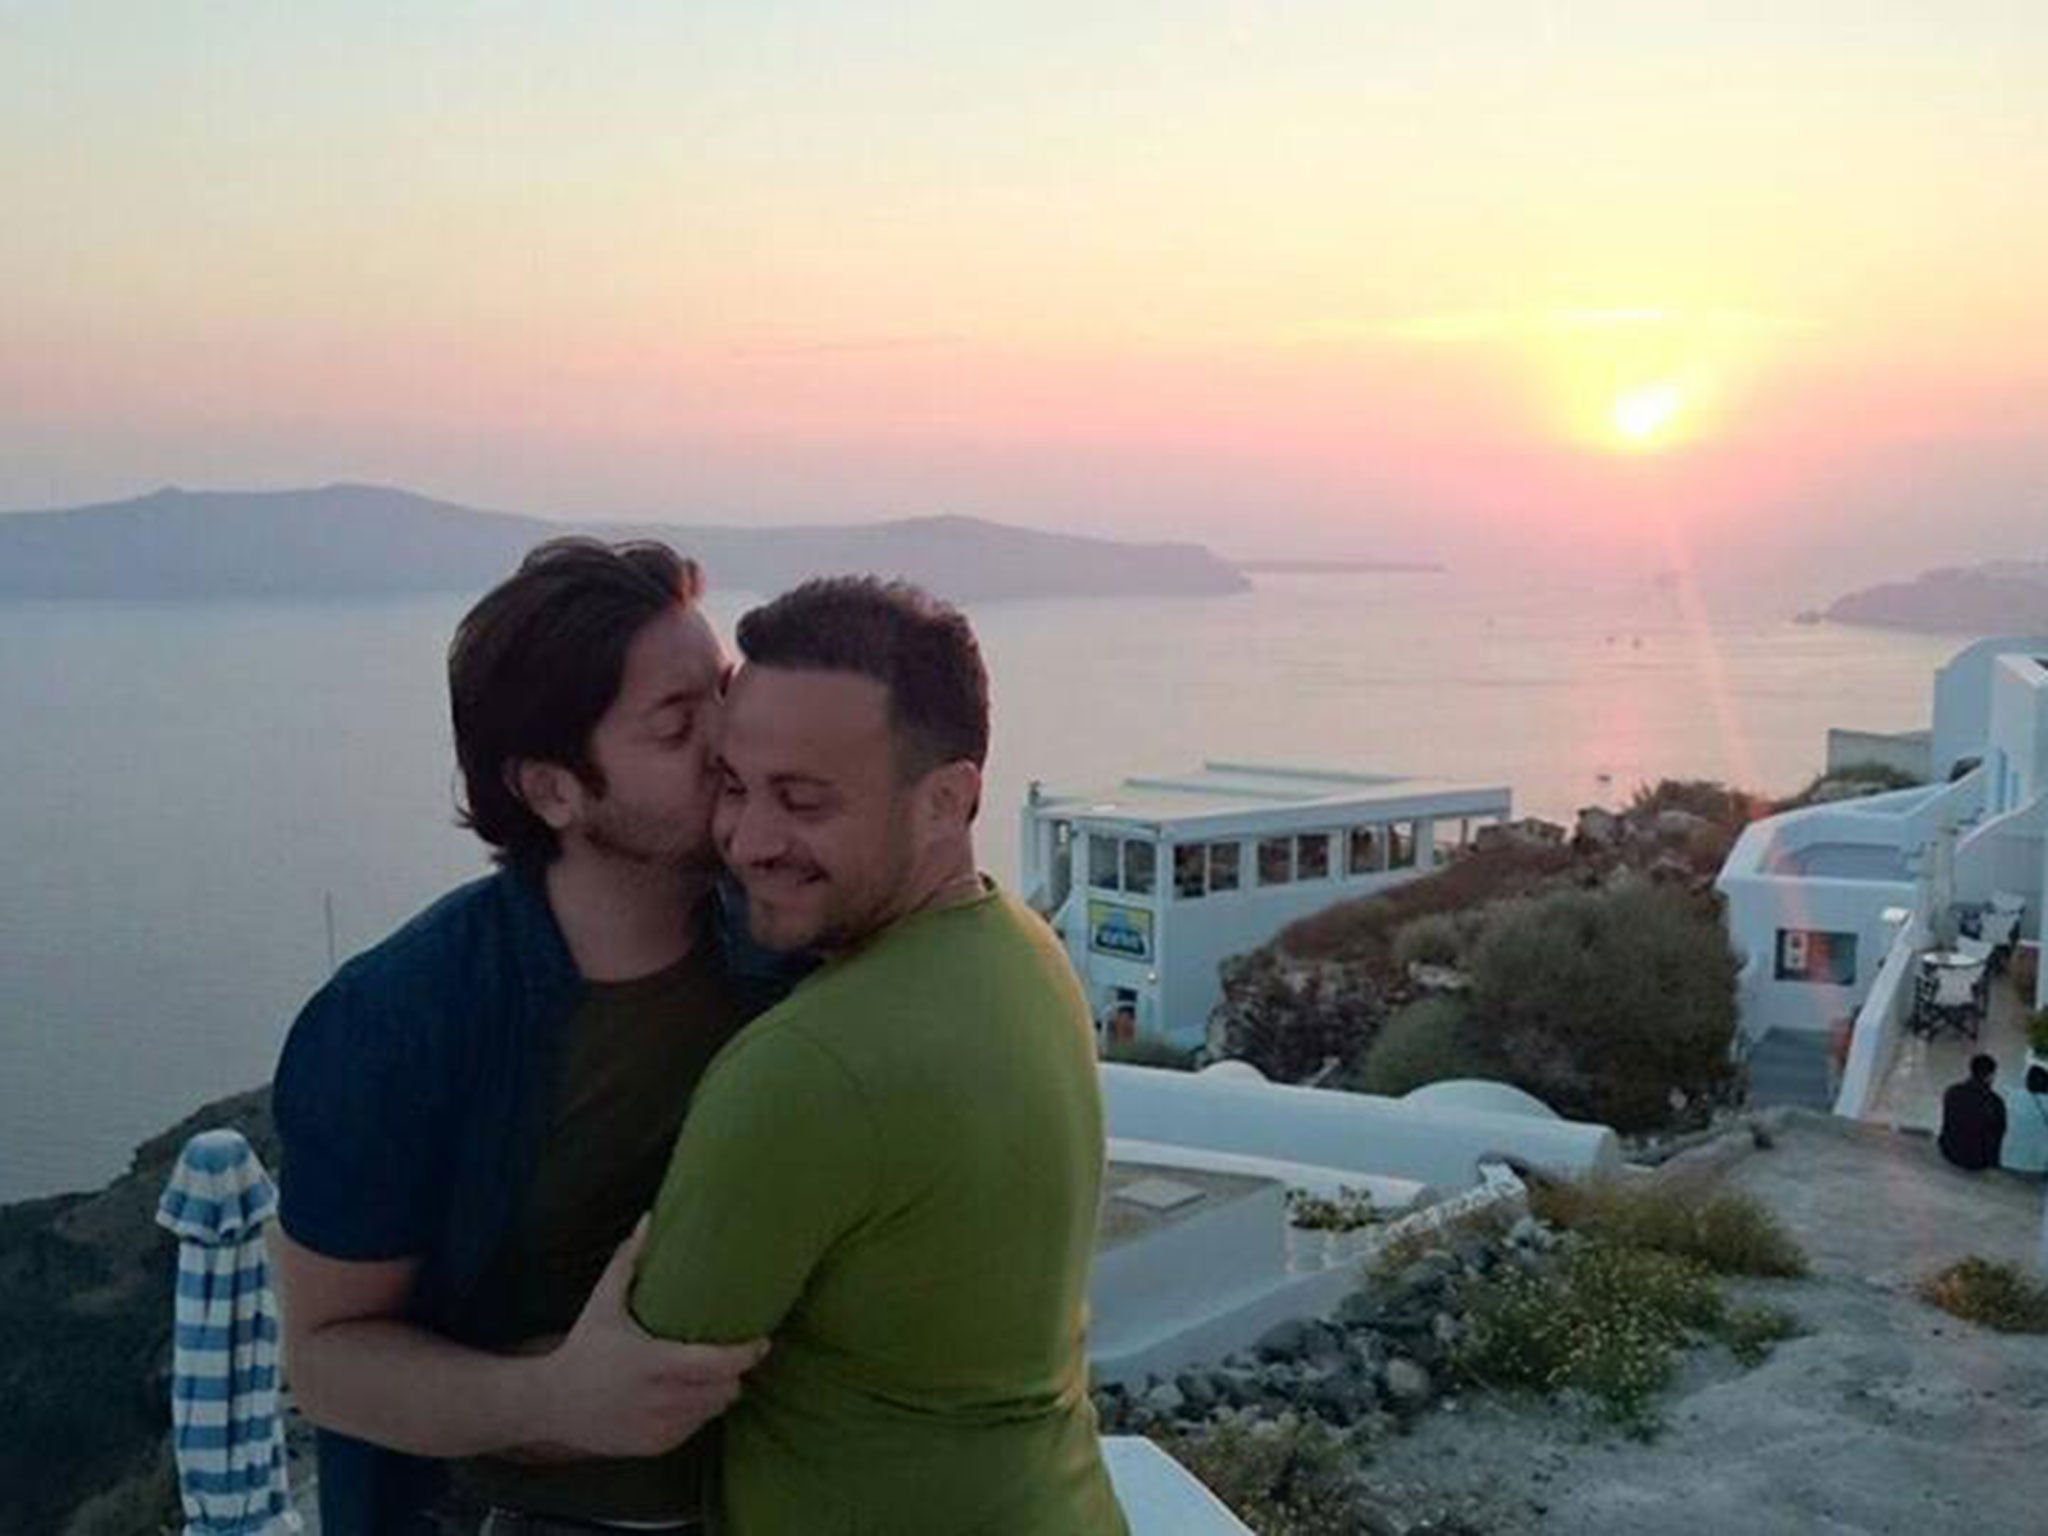 David and Marco Bulmer-Rizzi's marriage was not recognised in Australia after David's sudden death on their honeymoon